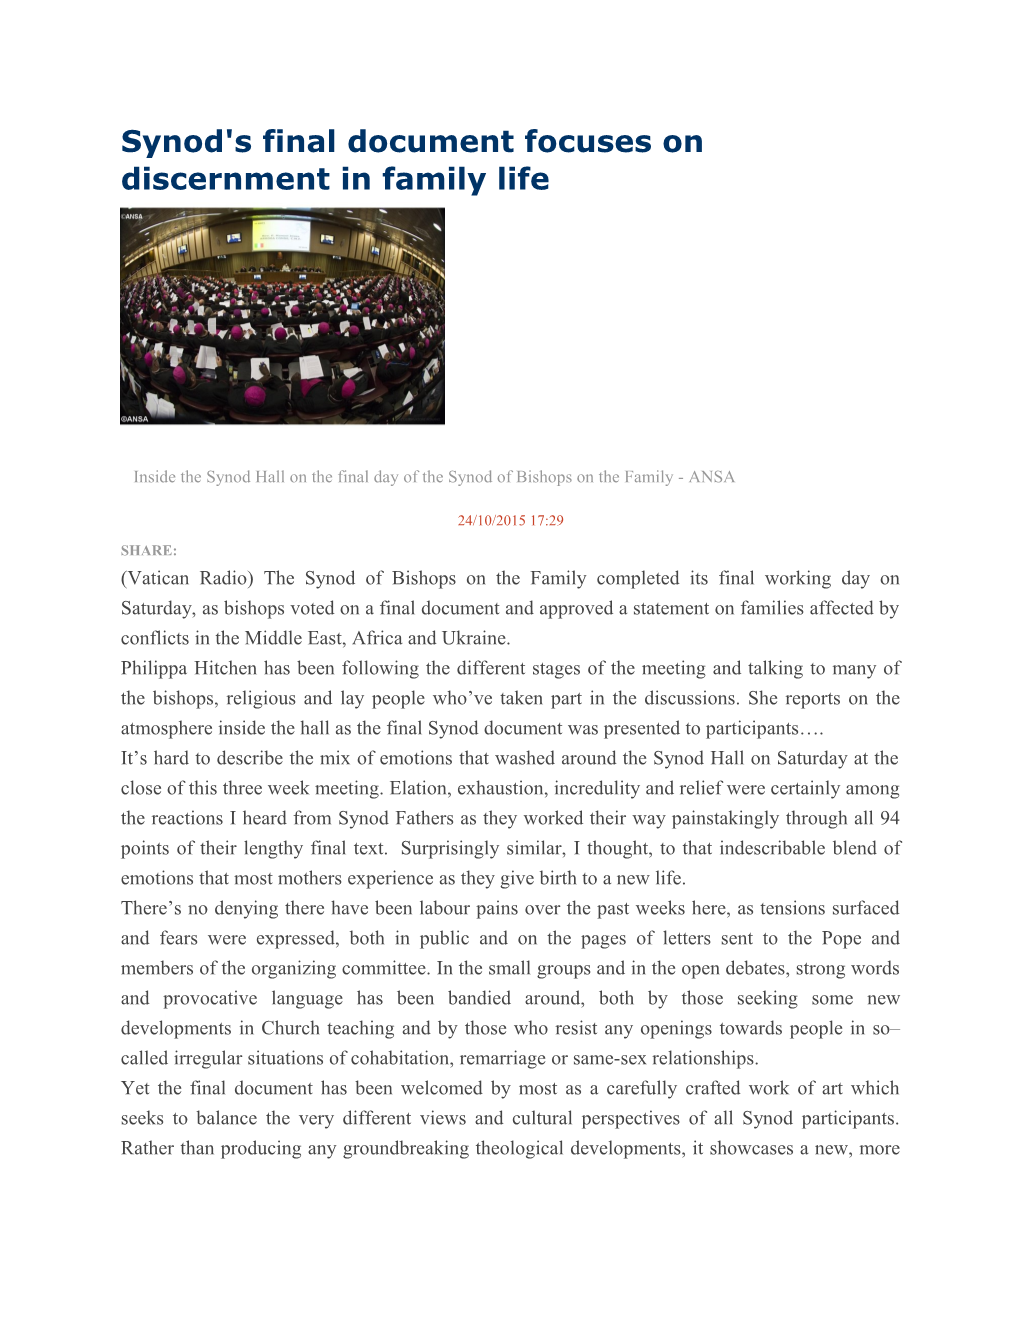 Synod's Final Document Focuses on Discernment in Family Life